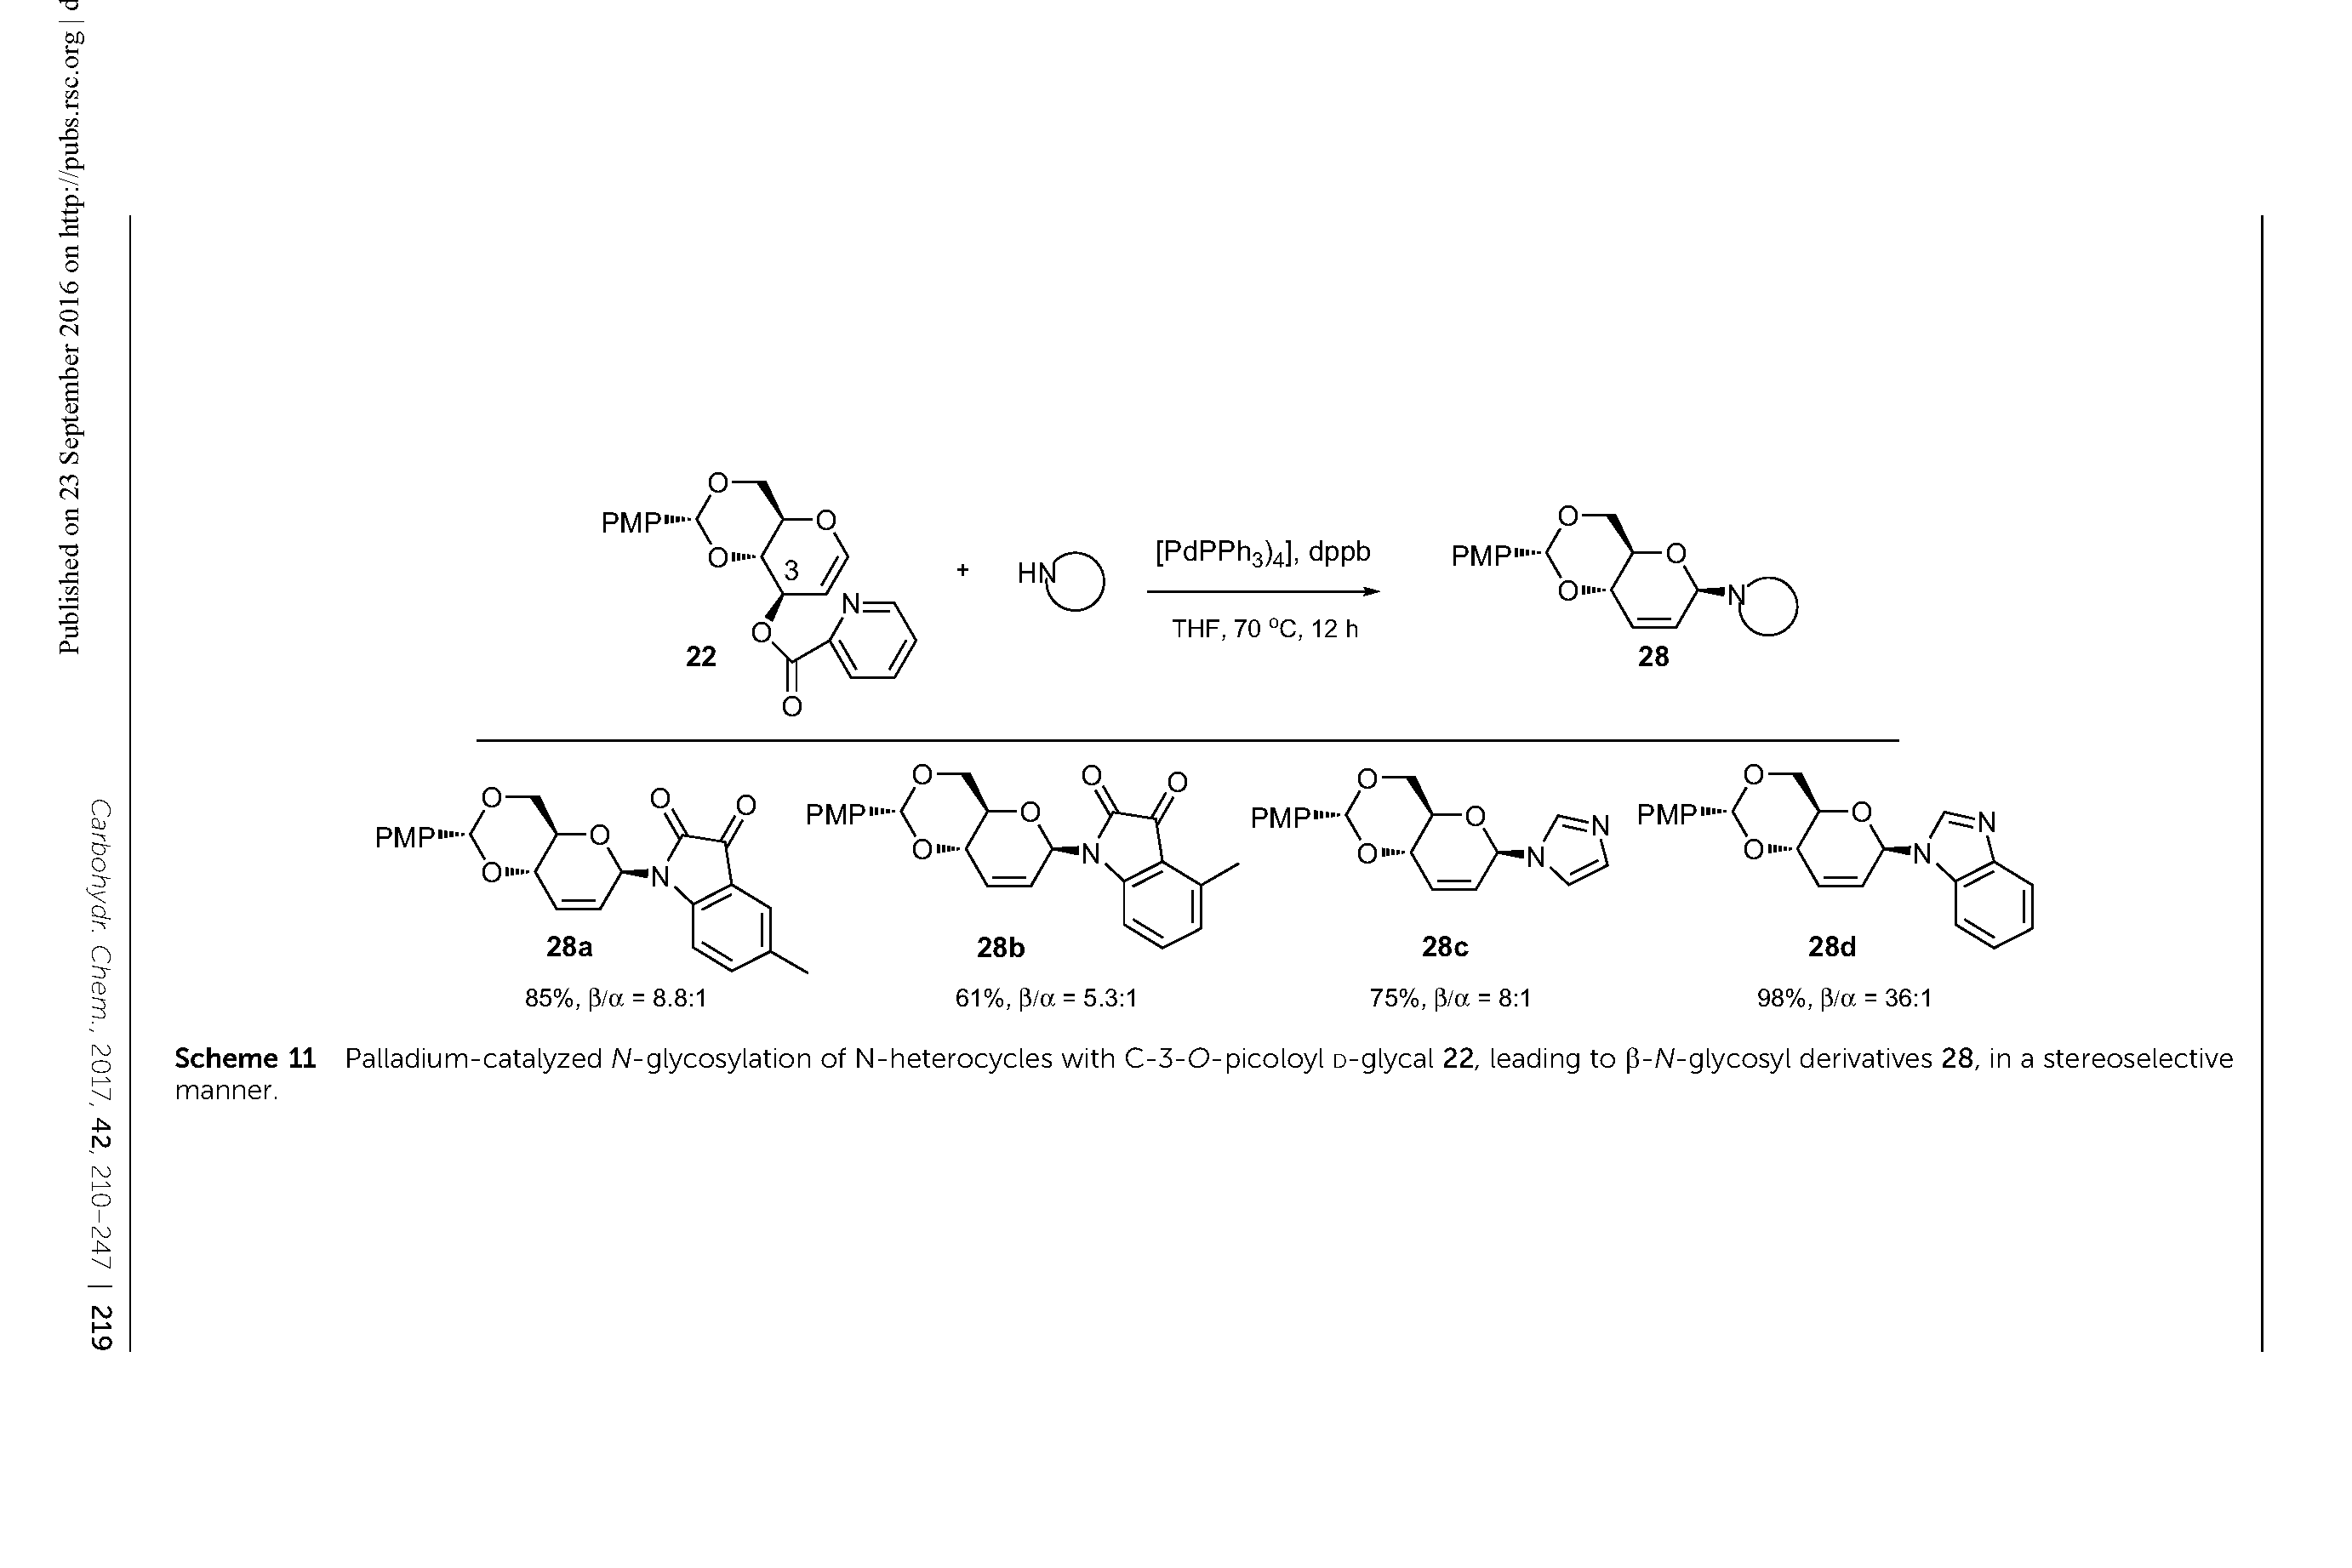 Scheme 11 Palladium-catalyzed A/-glycosylation of N-heterocycles with C-3-O-picoloyl D-glycal 22, leading to p-A/-glycosyl derivatives 28, in a stereoselective manner.